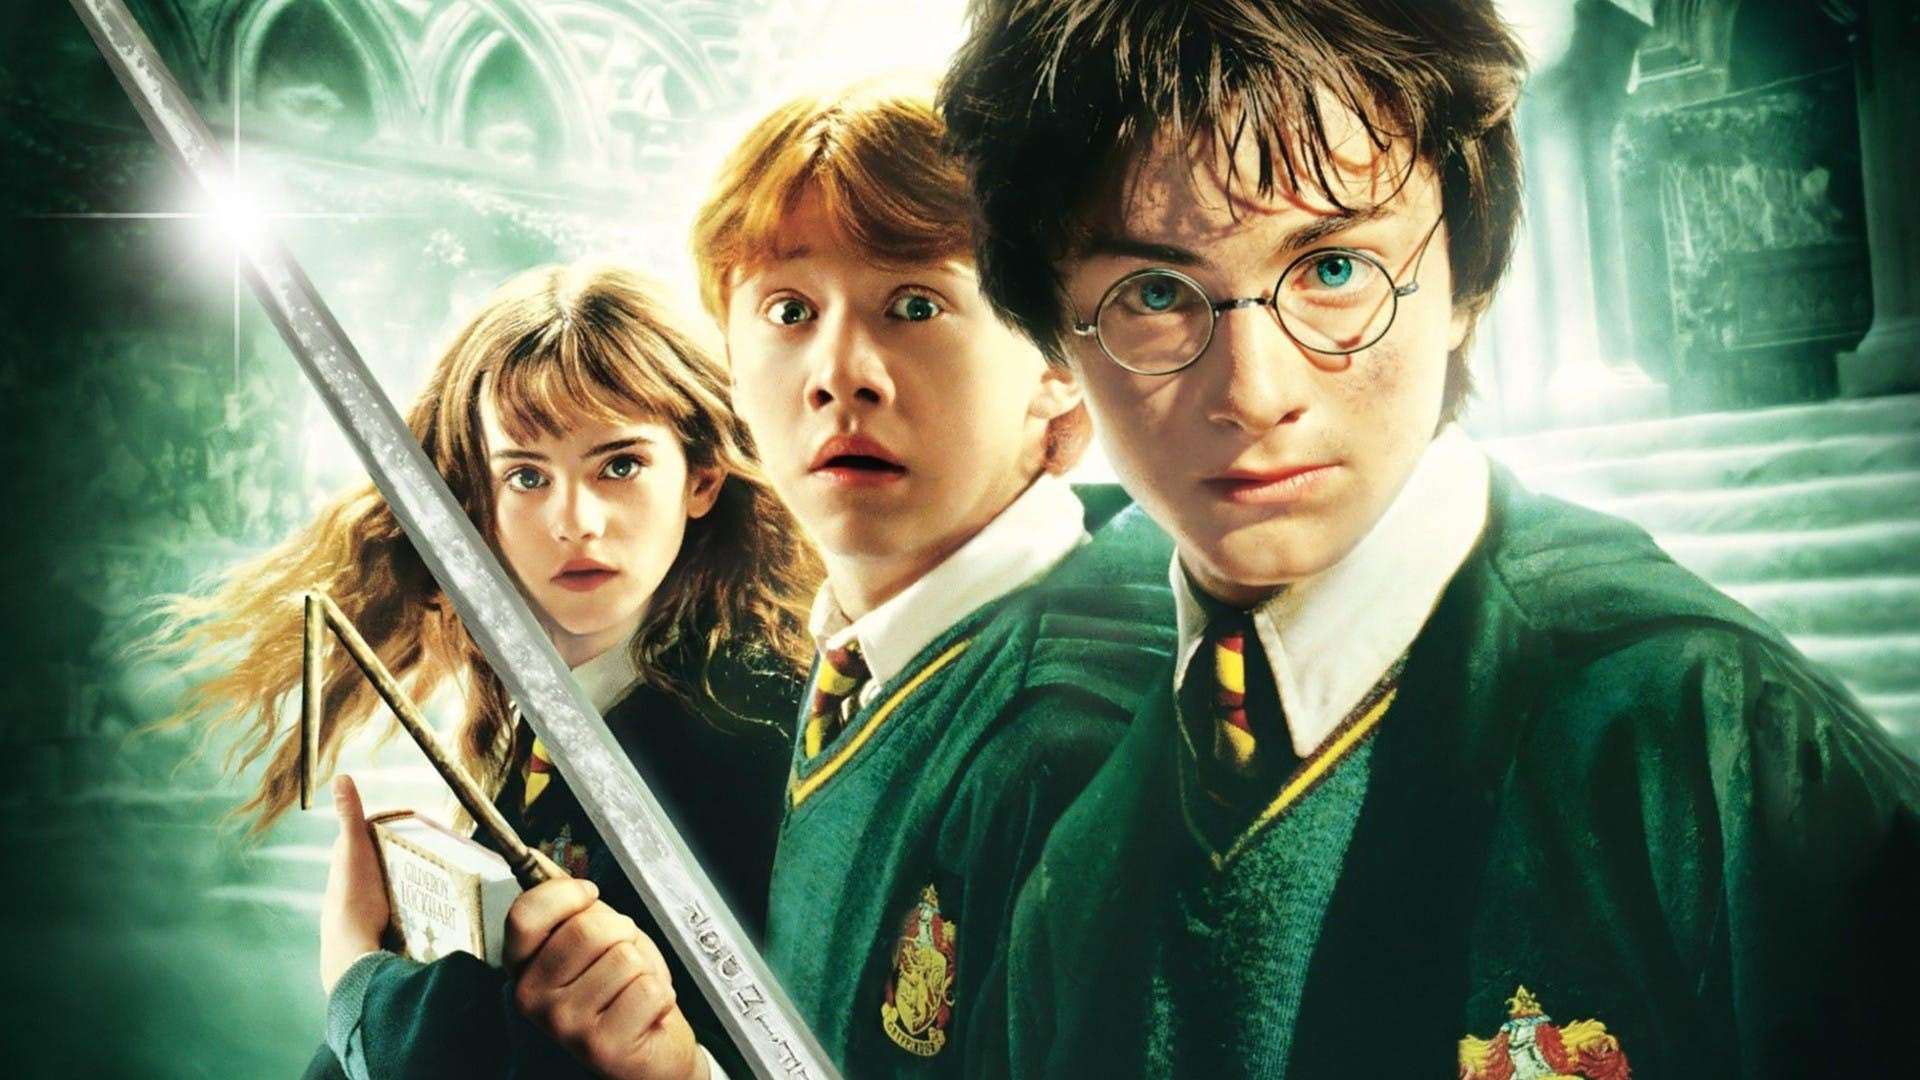 The first Harry Potter film celebrate's it's 20th anniversary in November